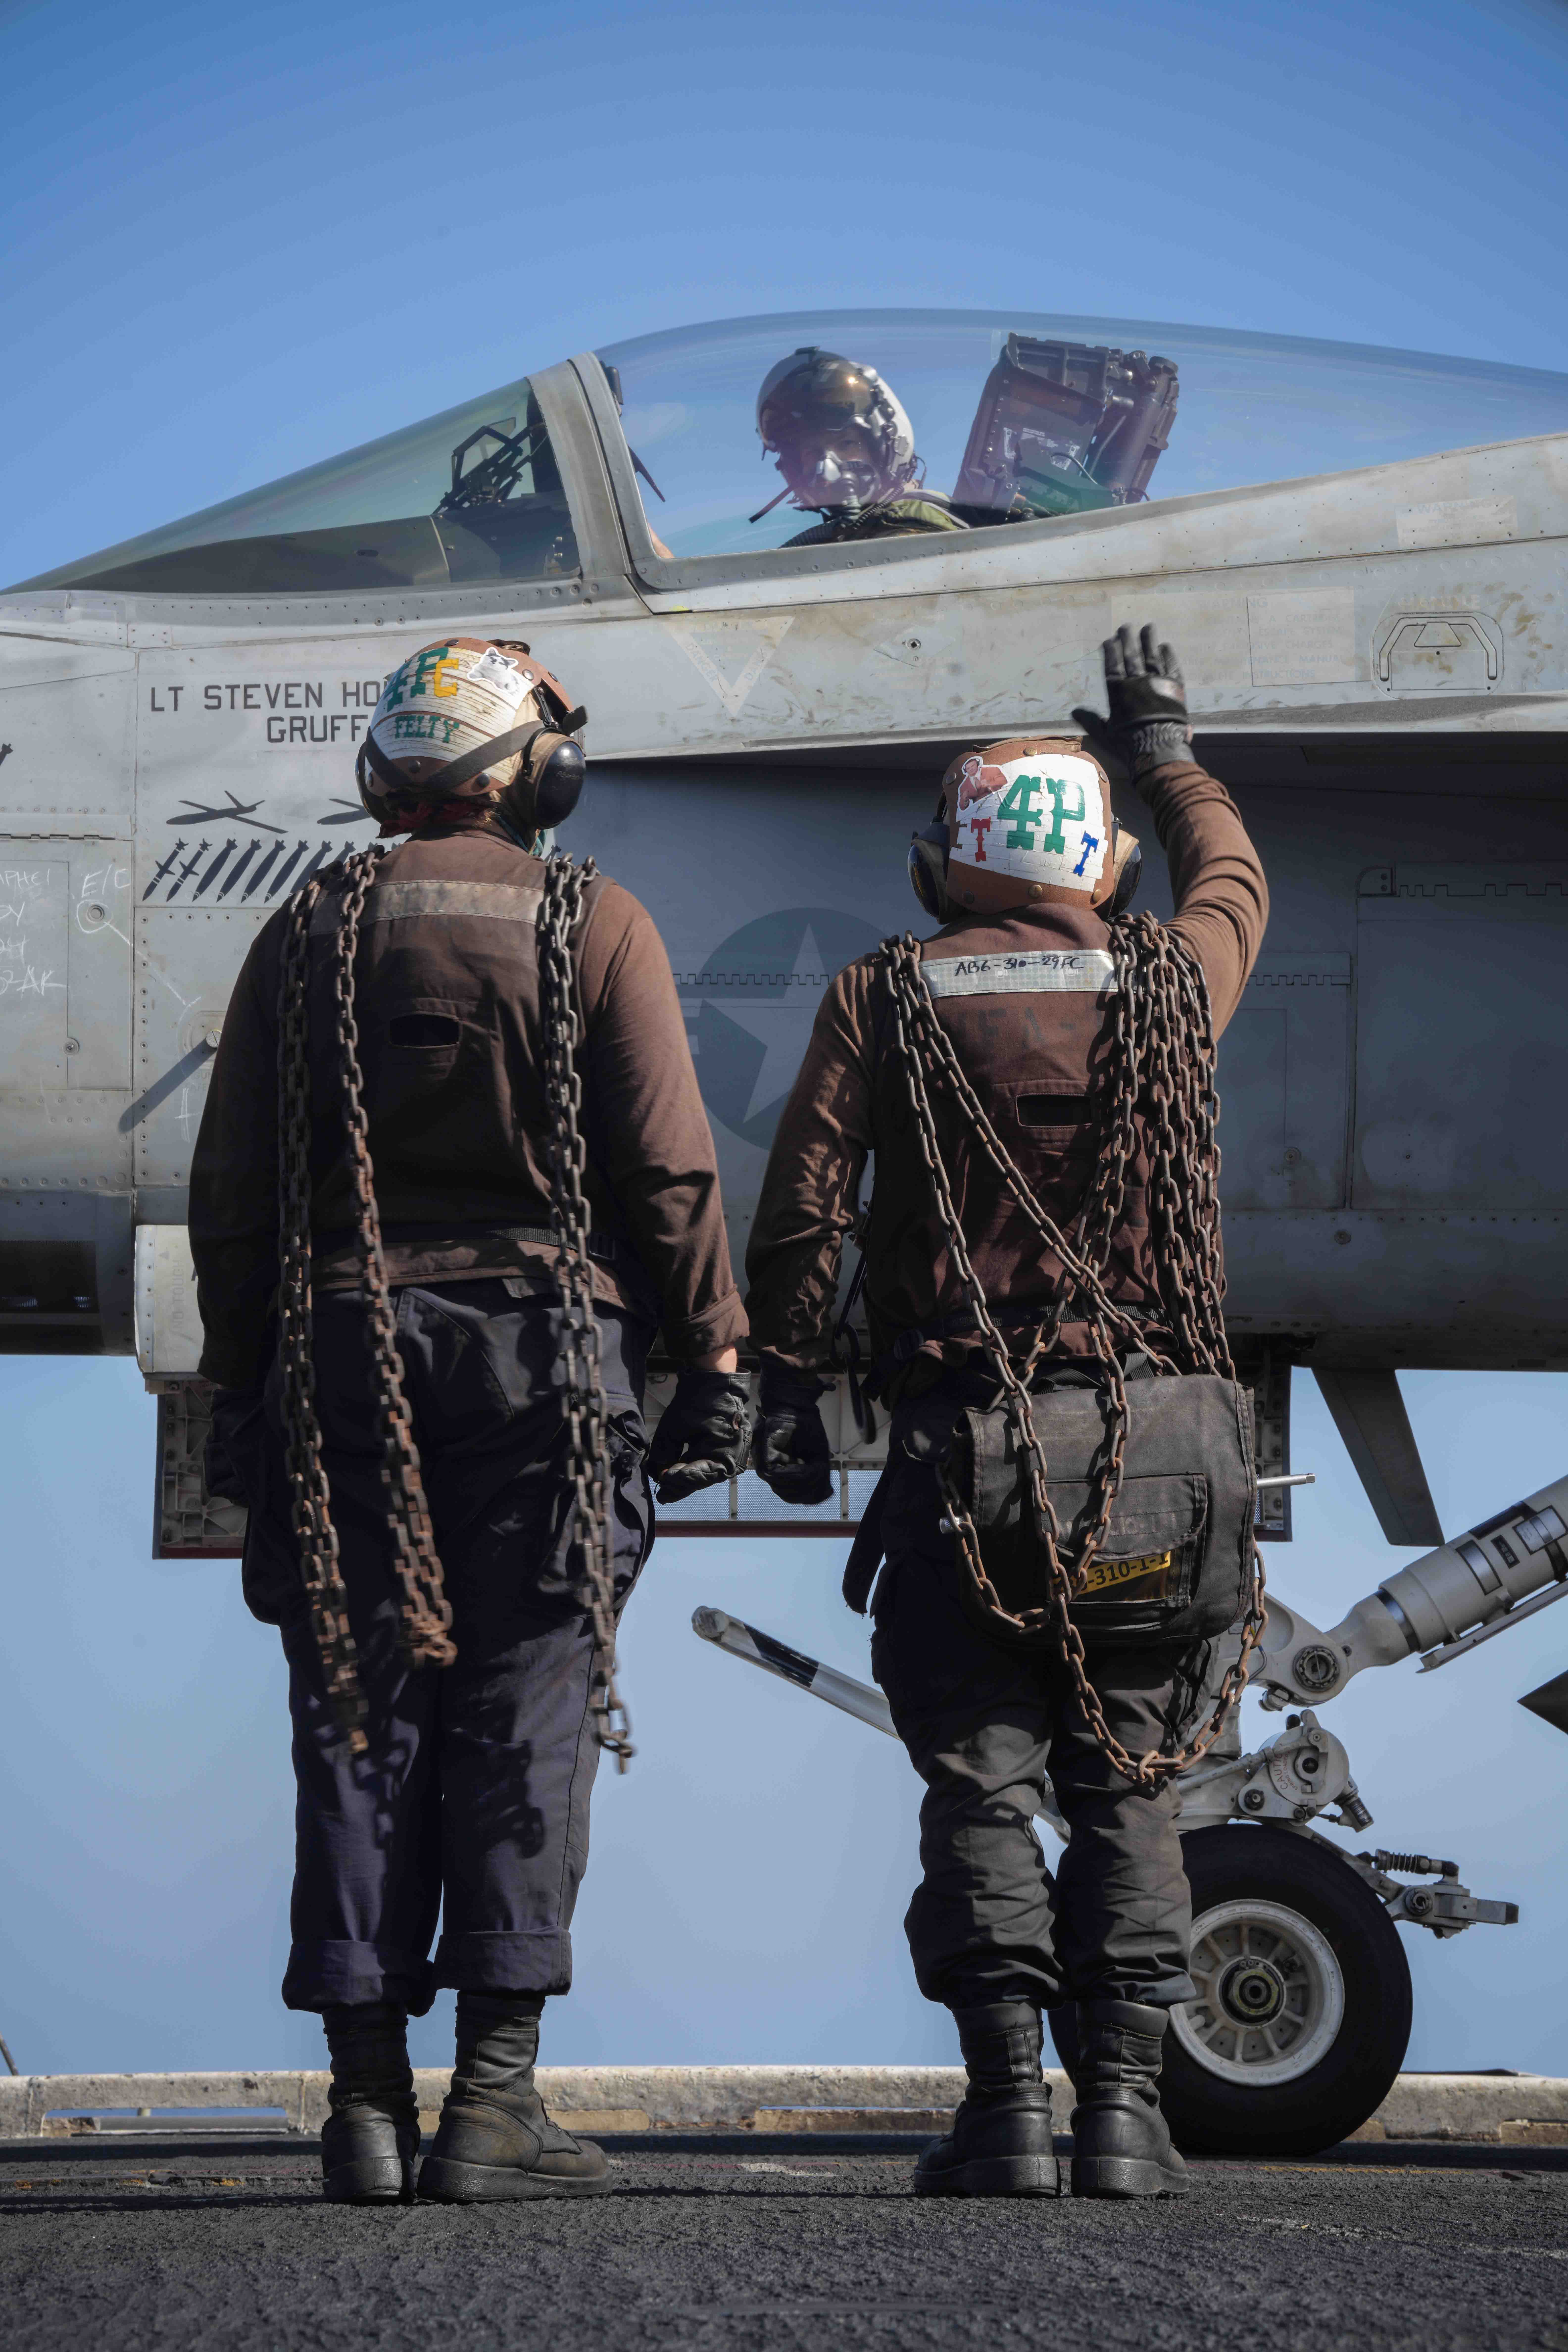 Sailors prepare to launch an F/A-18E of VFA-105, aboard USS <em>Dwight D. Eisenhower</em> in the Red Sea, on April 20. The jet wears drone kill markings as well as bomb and AGM-88 HARM symbols denoting successful air-to-ground strike missions. <em>Official U.S. Navy photo</em>